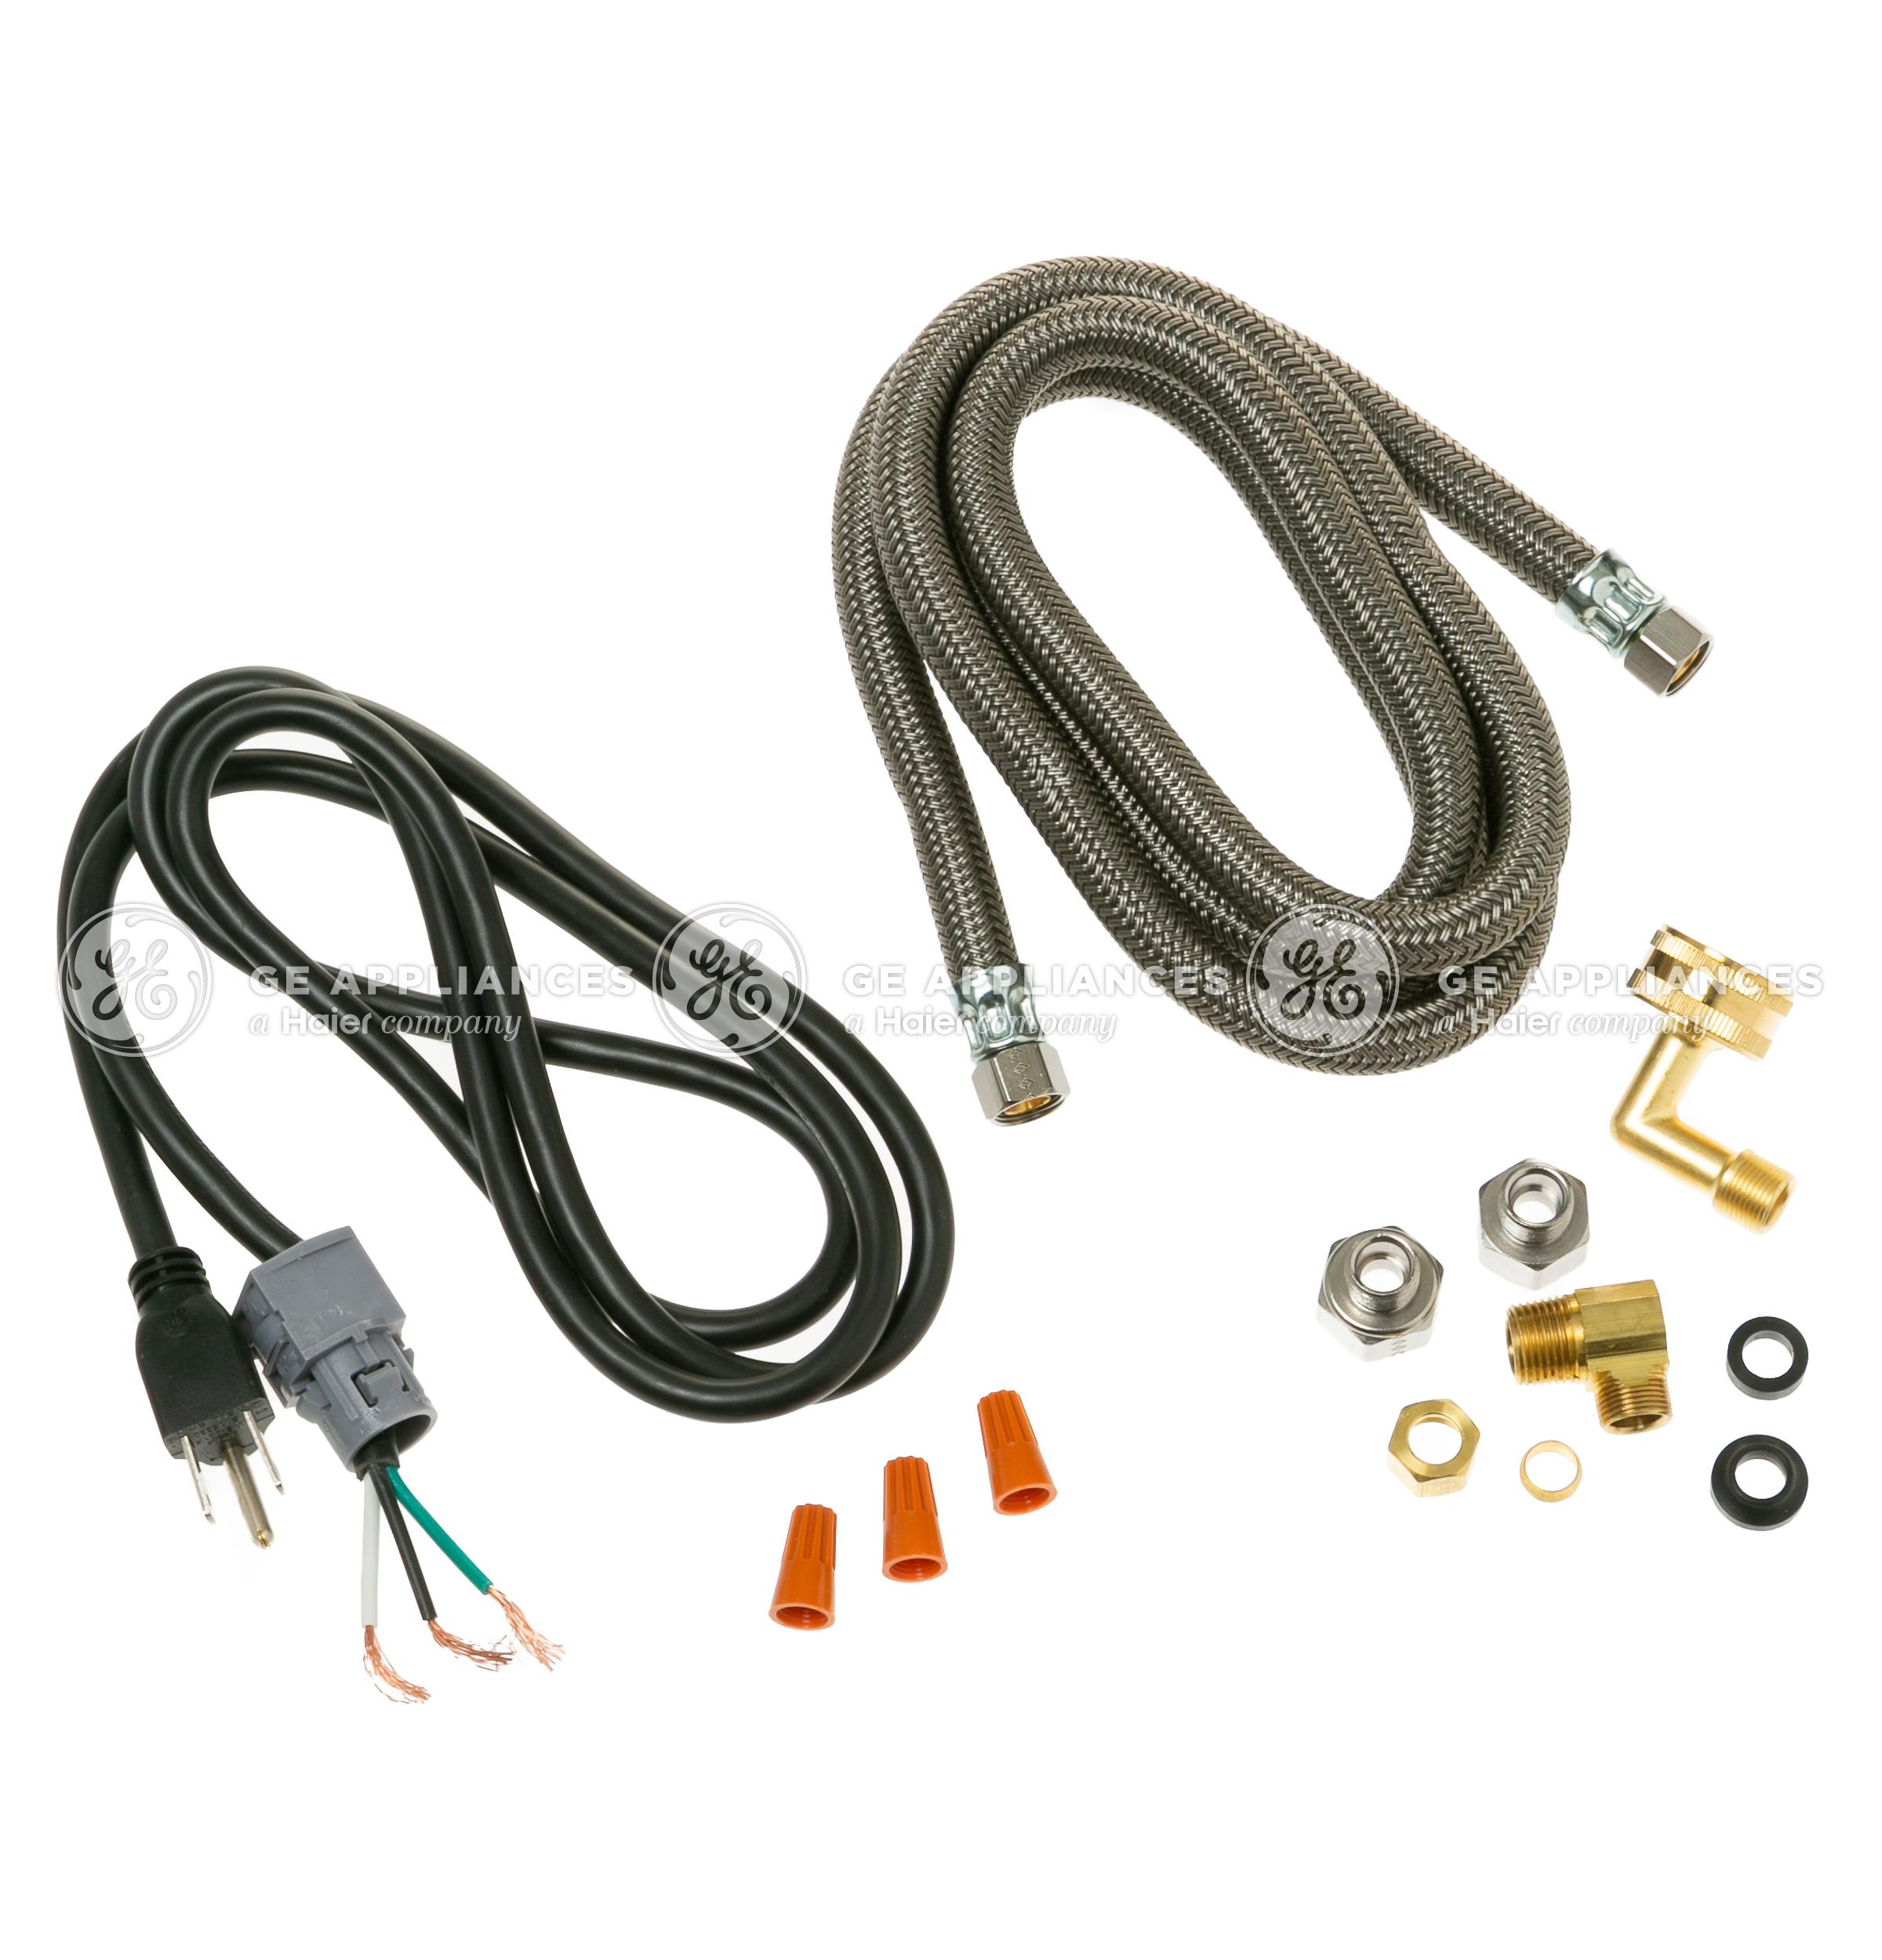 DISHWASHER CONNECTION AND POWER CORD KIT